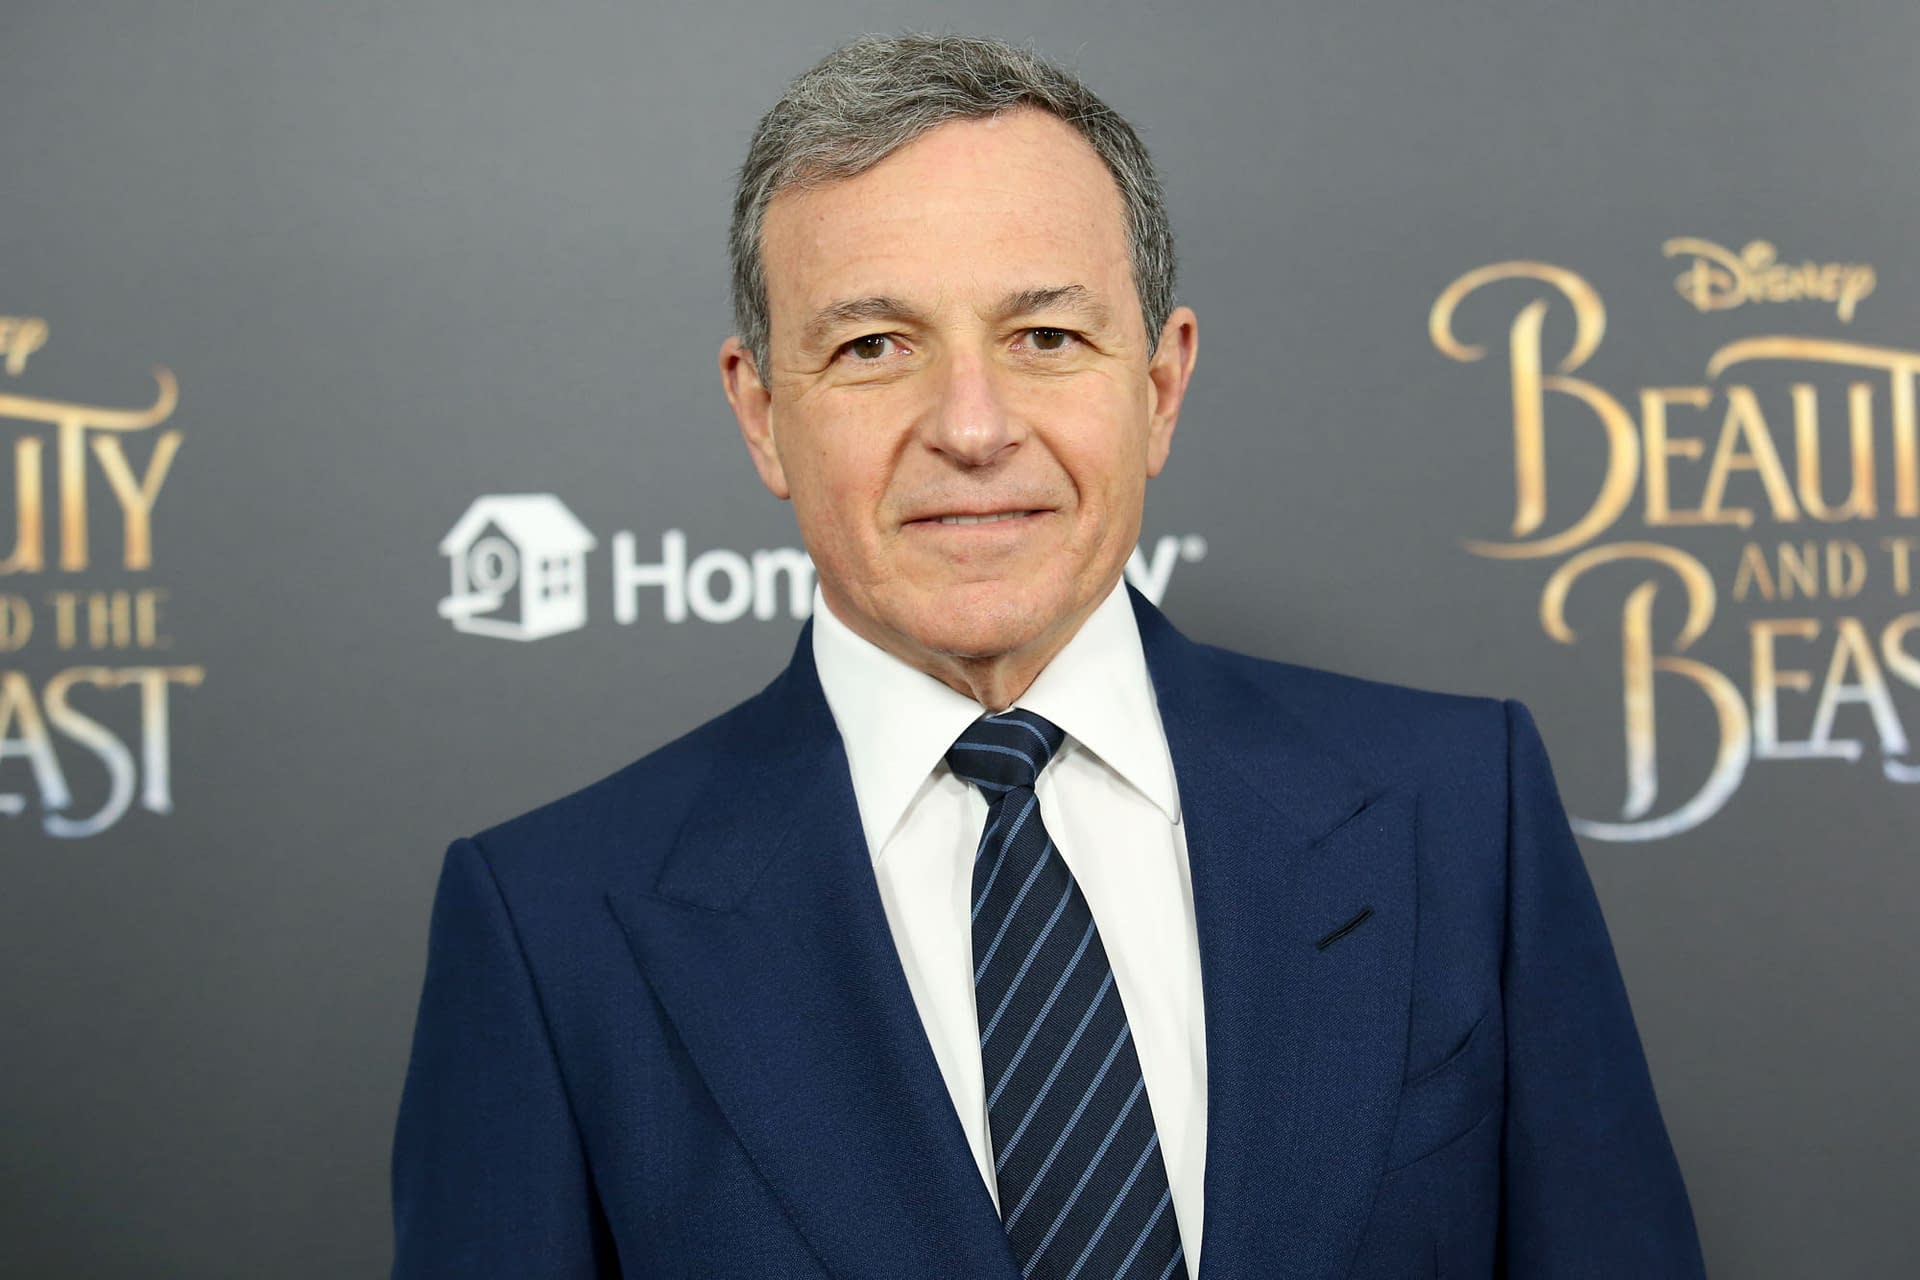 "Star Wars" Bob Iger Explains Creative Differences with George Lucas Over "The Force Awakens"